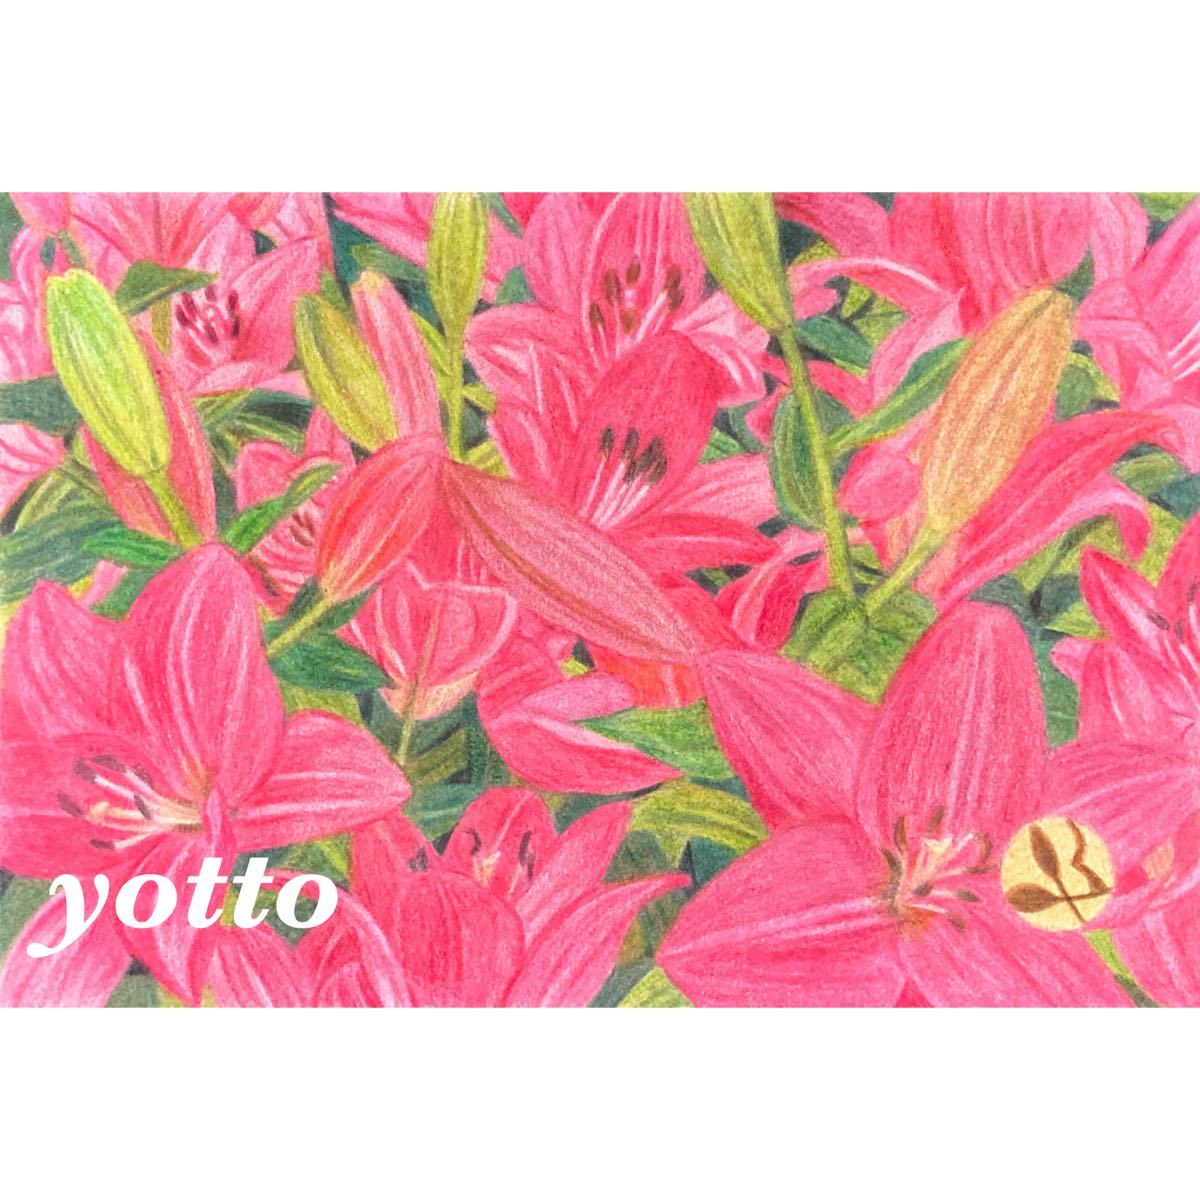 Colored pencil drawing Aya《9》 ~ Lily ~ Postcard size/with frame◇◆Hand-drawn◇Original drawing◆Flower◇◆Yotto, artwork, painting, pencil drawing, charcoal drawing